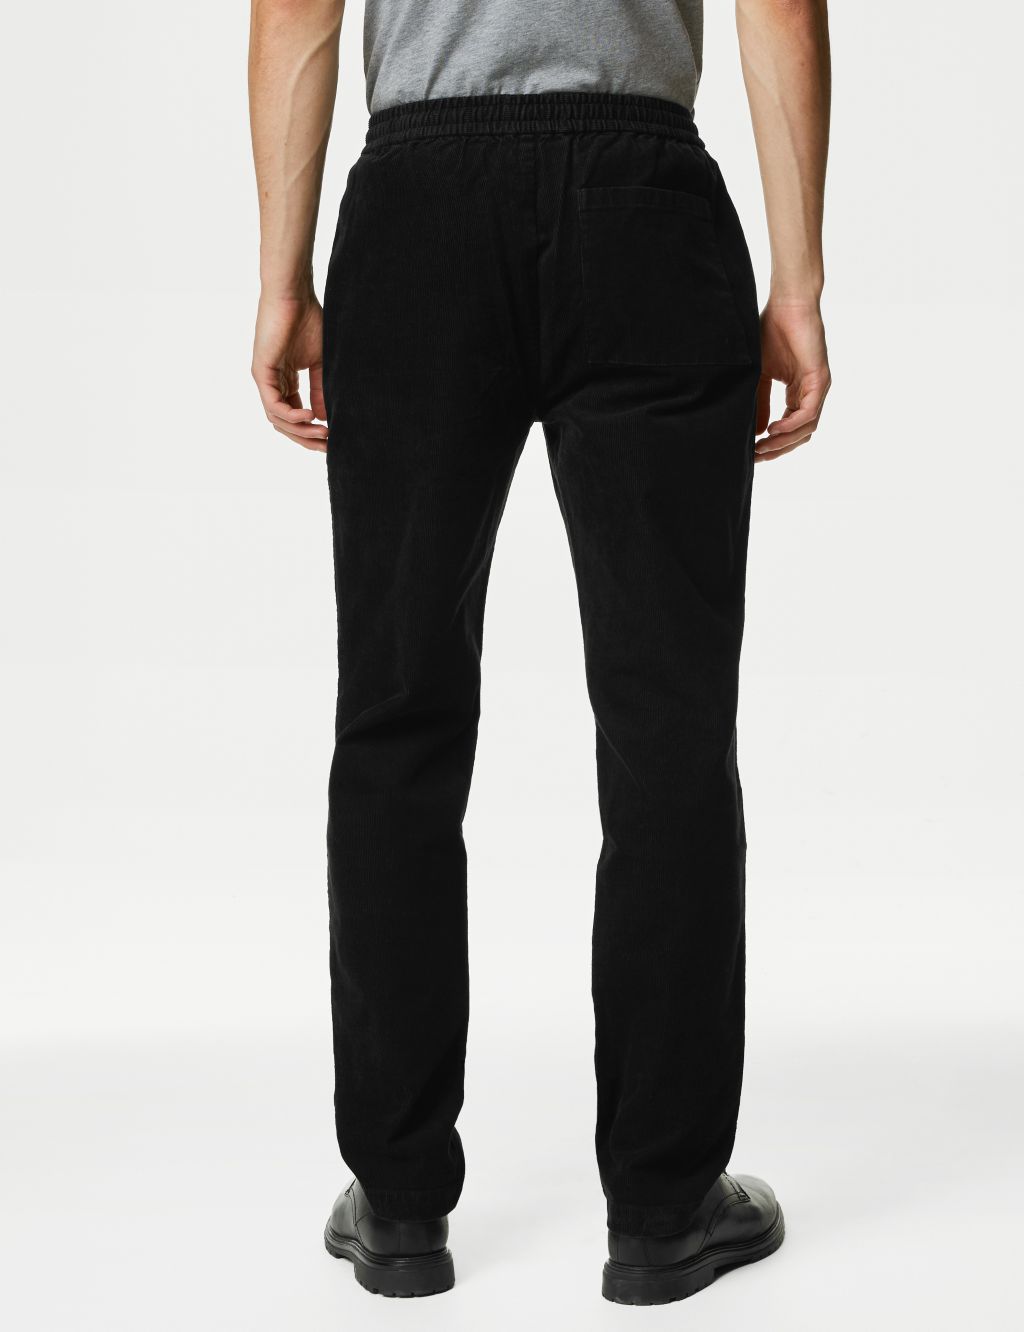 Tapered Fit Corduroy Stretch Joggers image 5